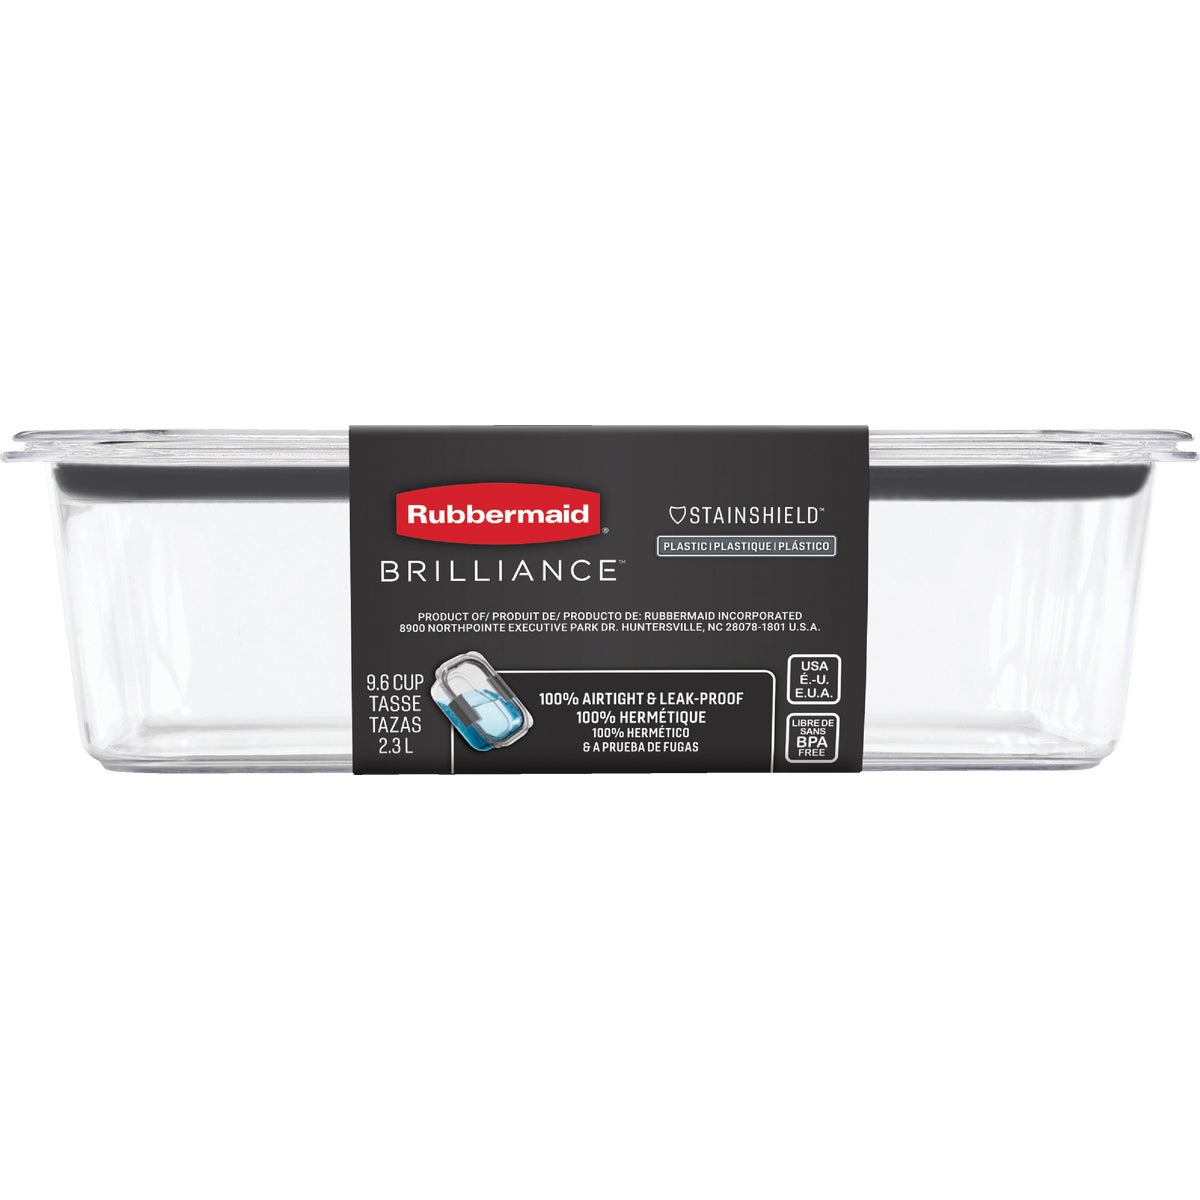 Rubbermaid Brilliance Food Storage Container, Medium, 3.2 Cup, Clear 1991156